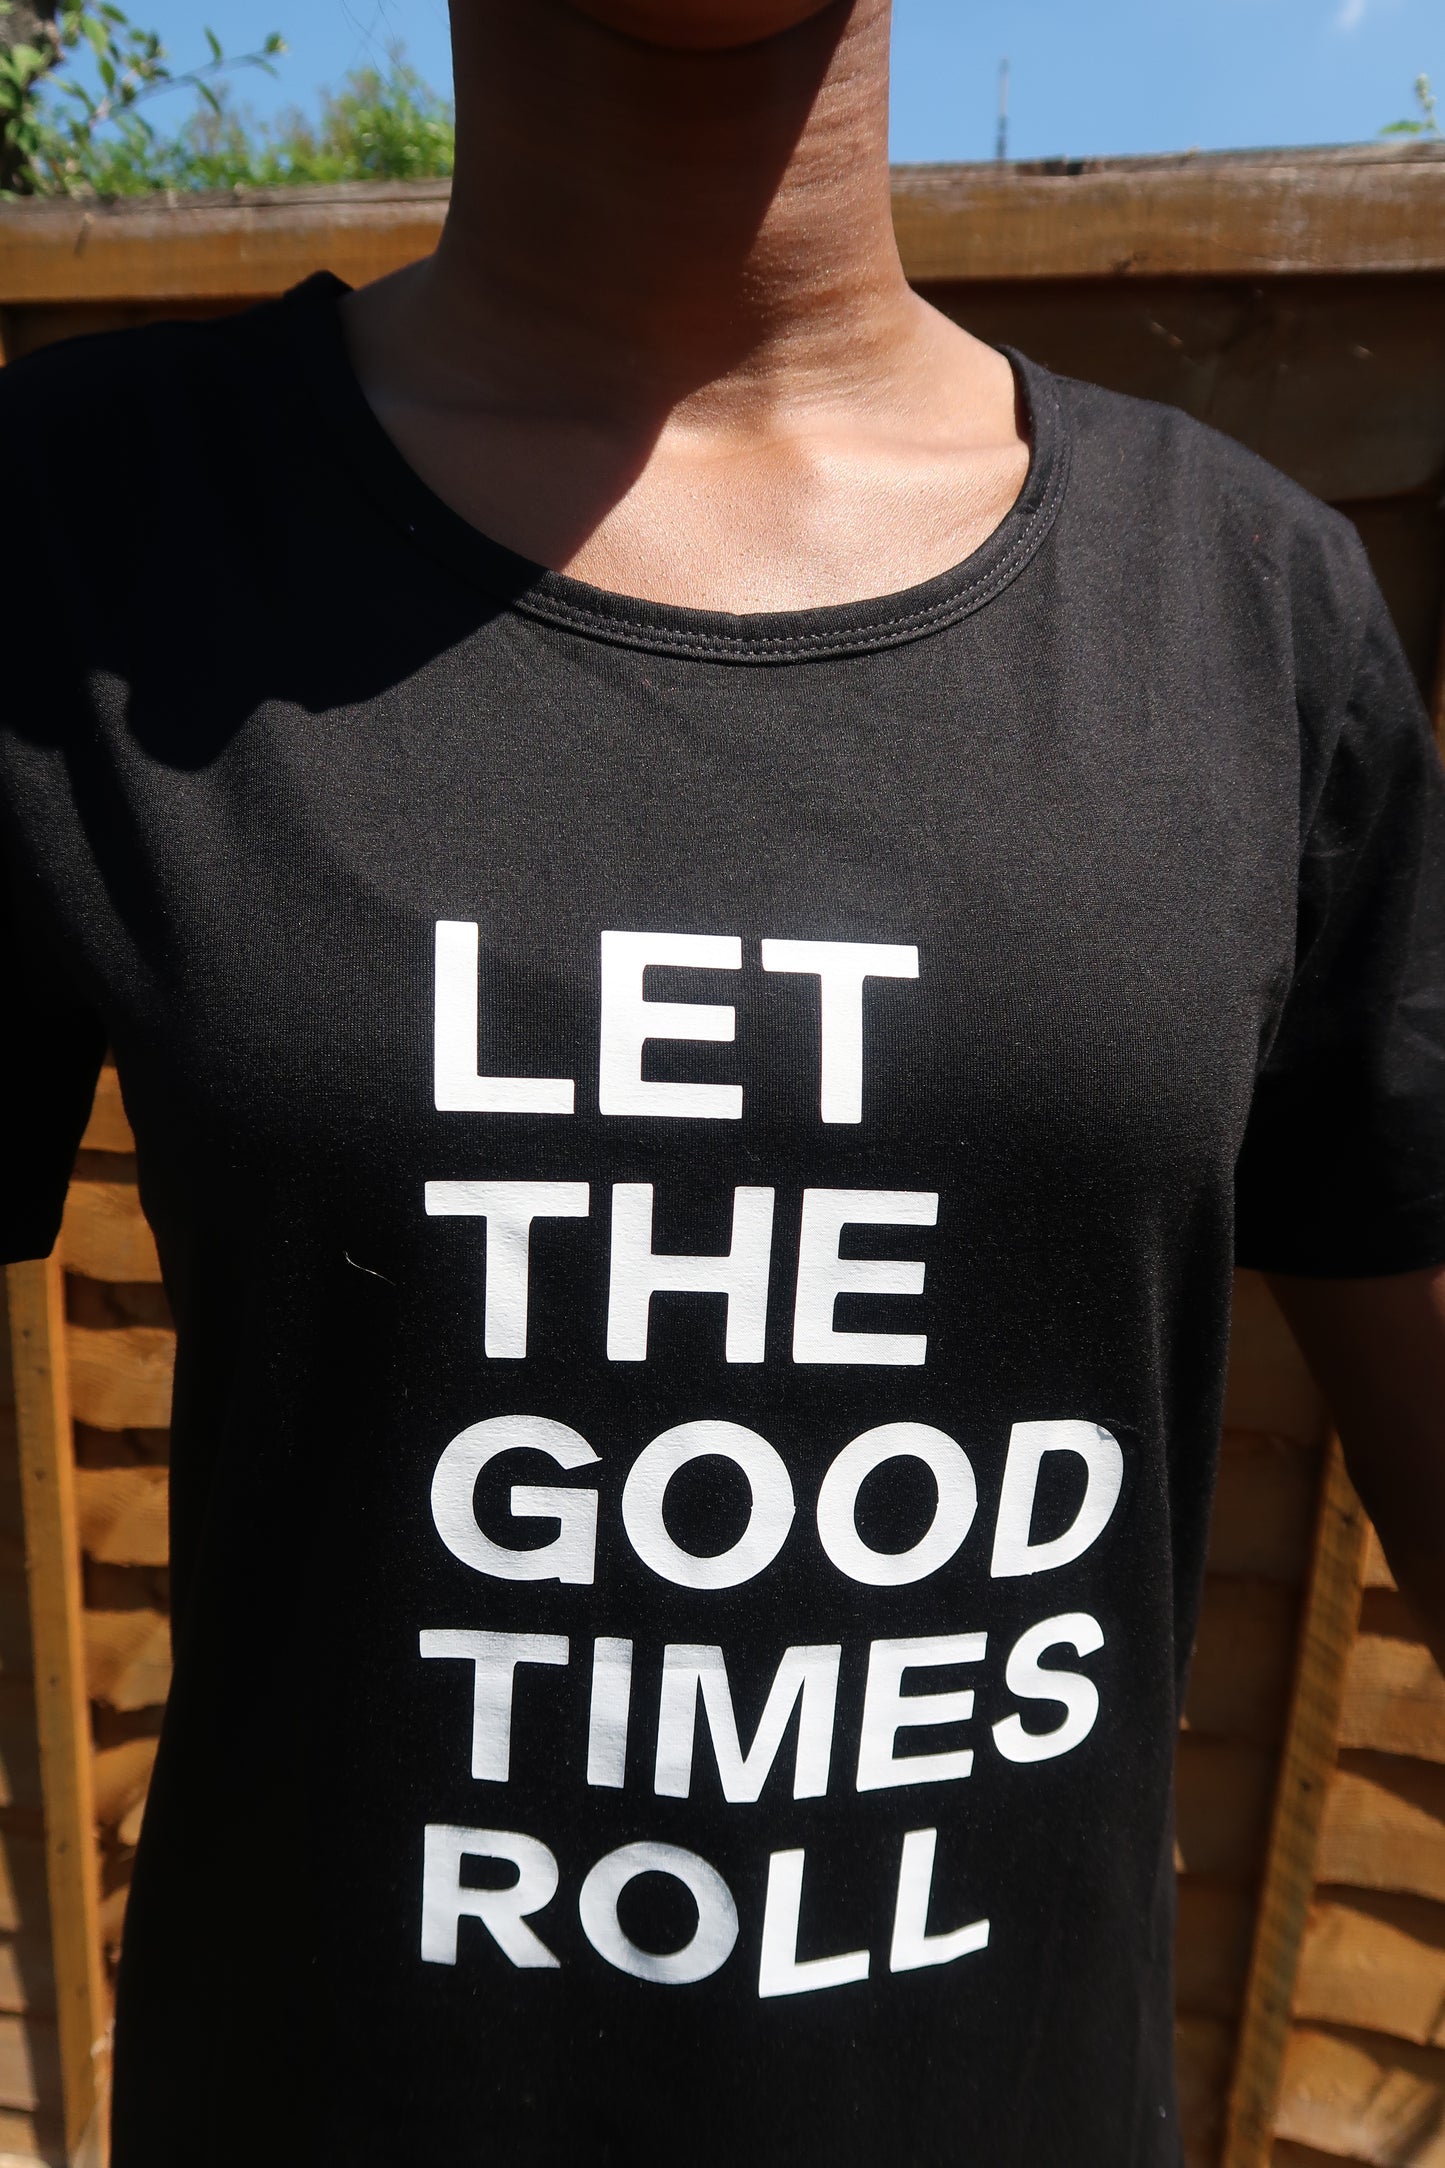 Let the good times roll - Black t-shirt